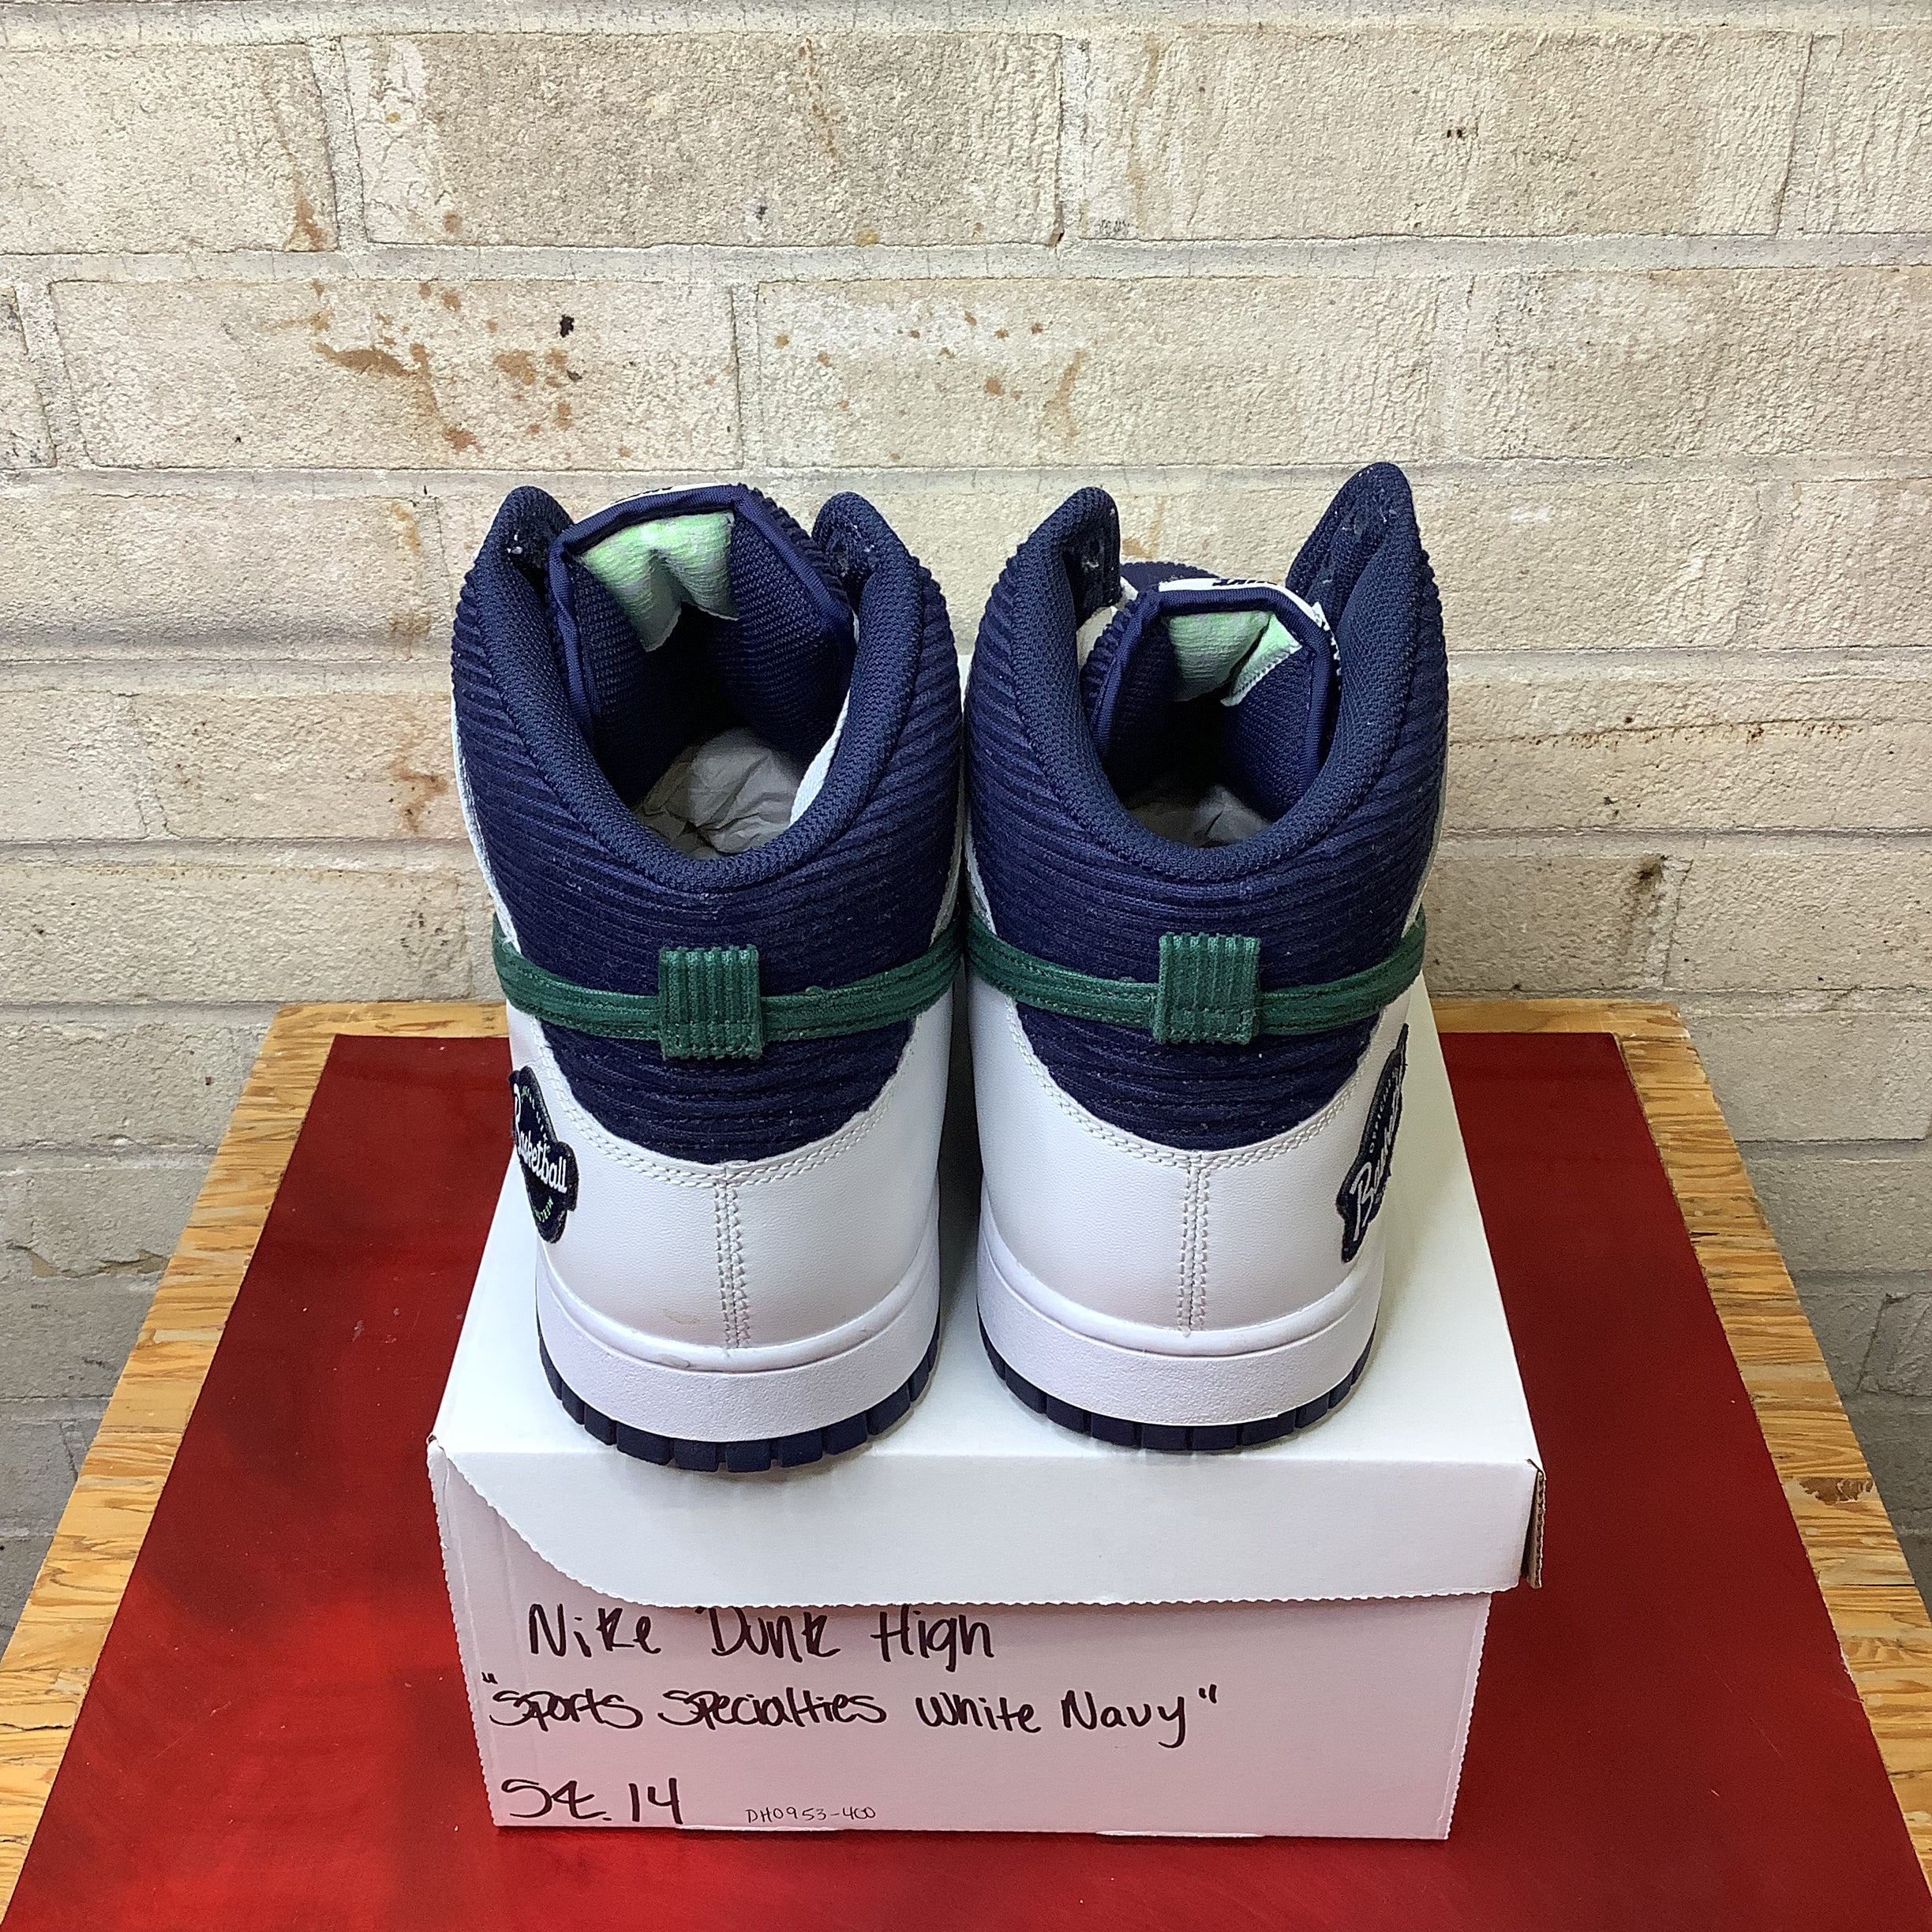 NIKE DUNK HIGH SPORTS SPECIALTIES WHITE NAVY SIZE 14 DH0953-400